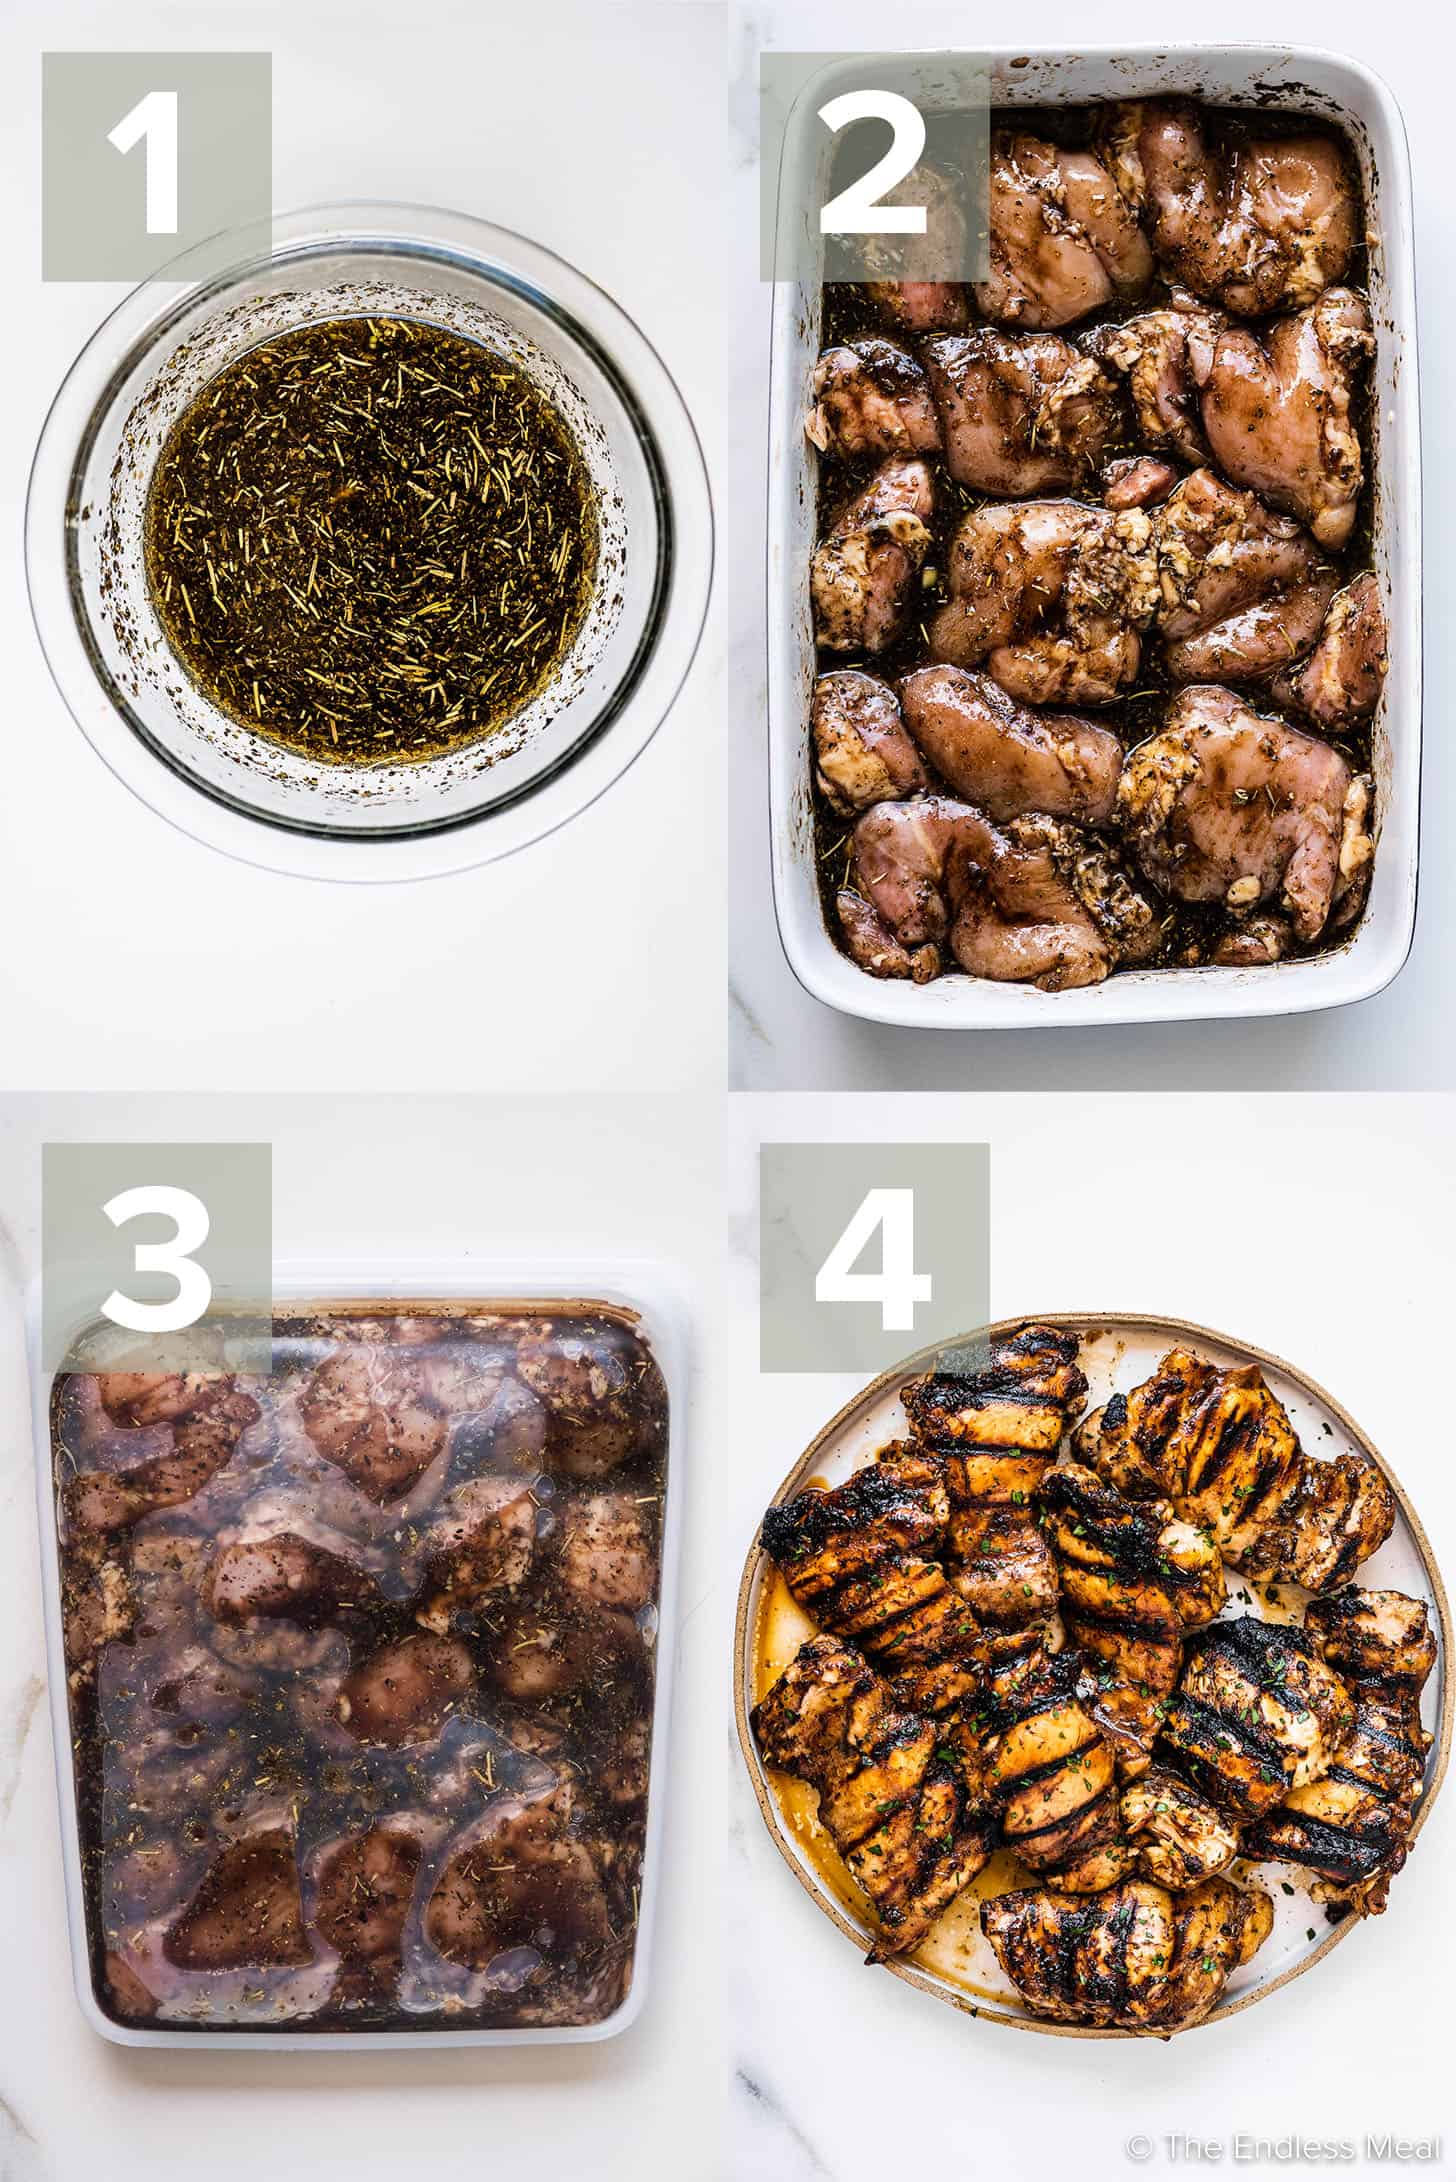 4 pictures showing how to make this Balsamic Chicken Marinade recipe